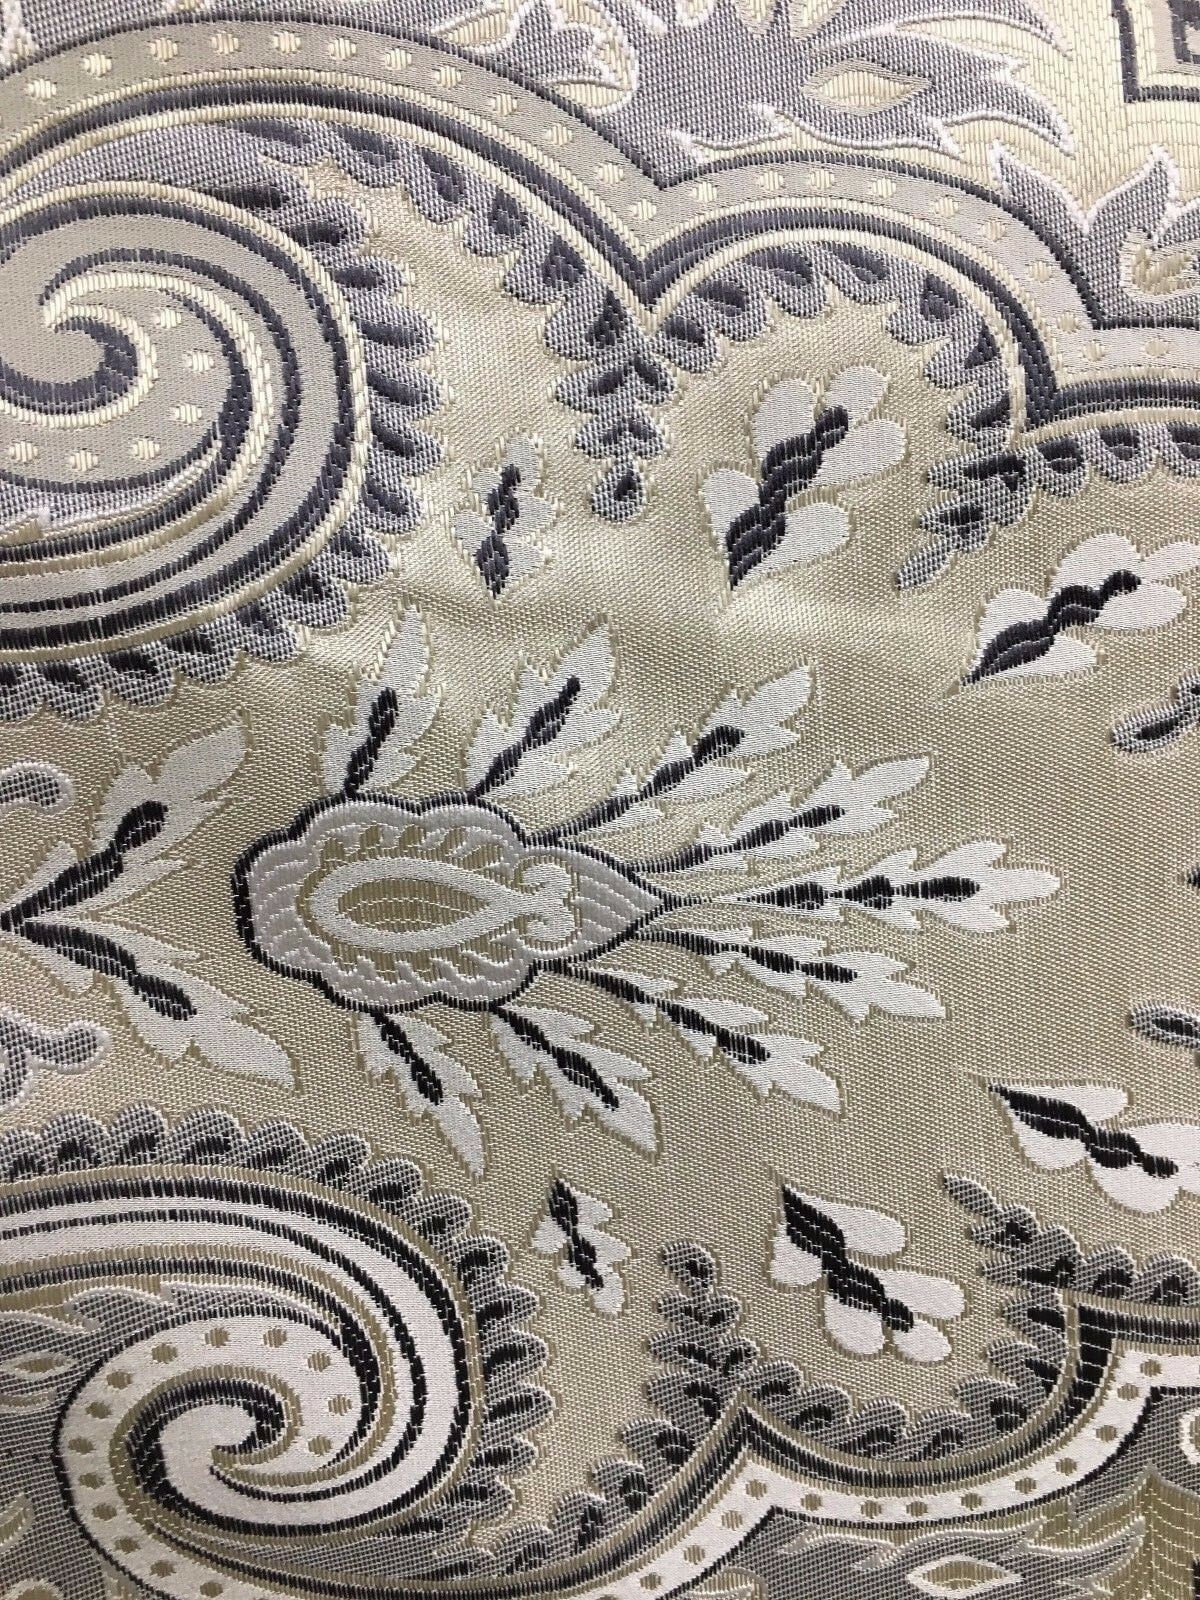 IVORY GREY Damask Brocade Upholstery Drapery Fabric (58 in.) Sold By The Yard